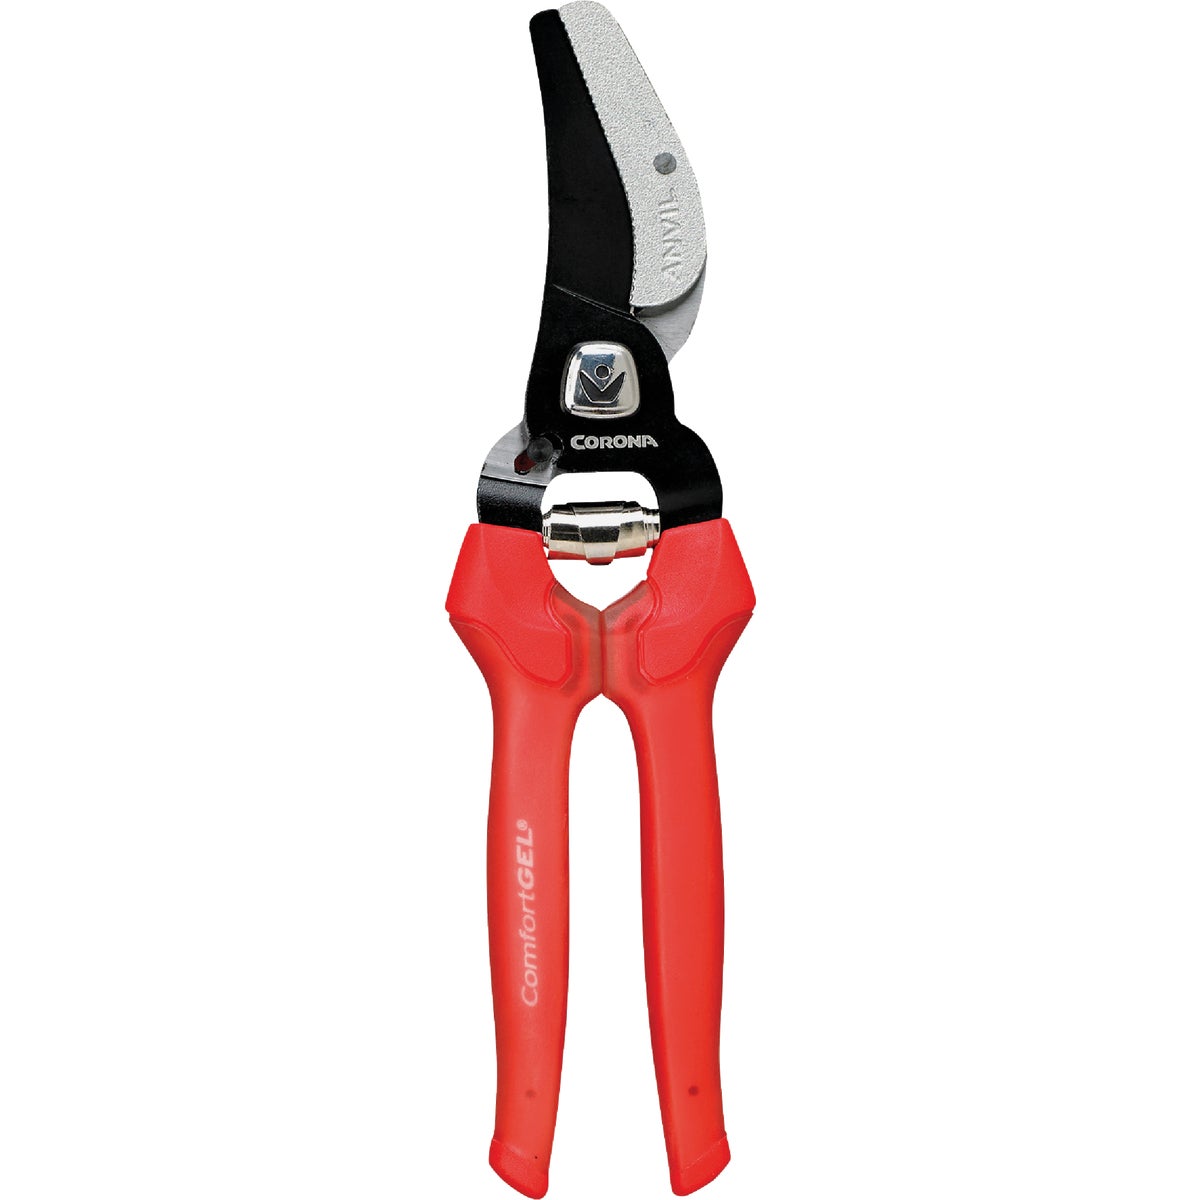 Item 720199, Branch and stem pruner with ComfortGEL grips for superior comfort and less 